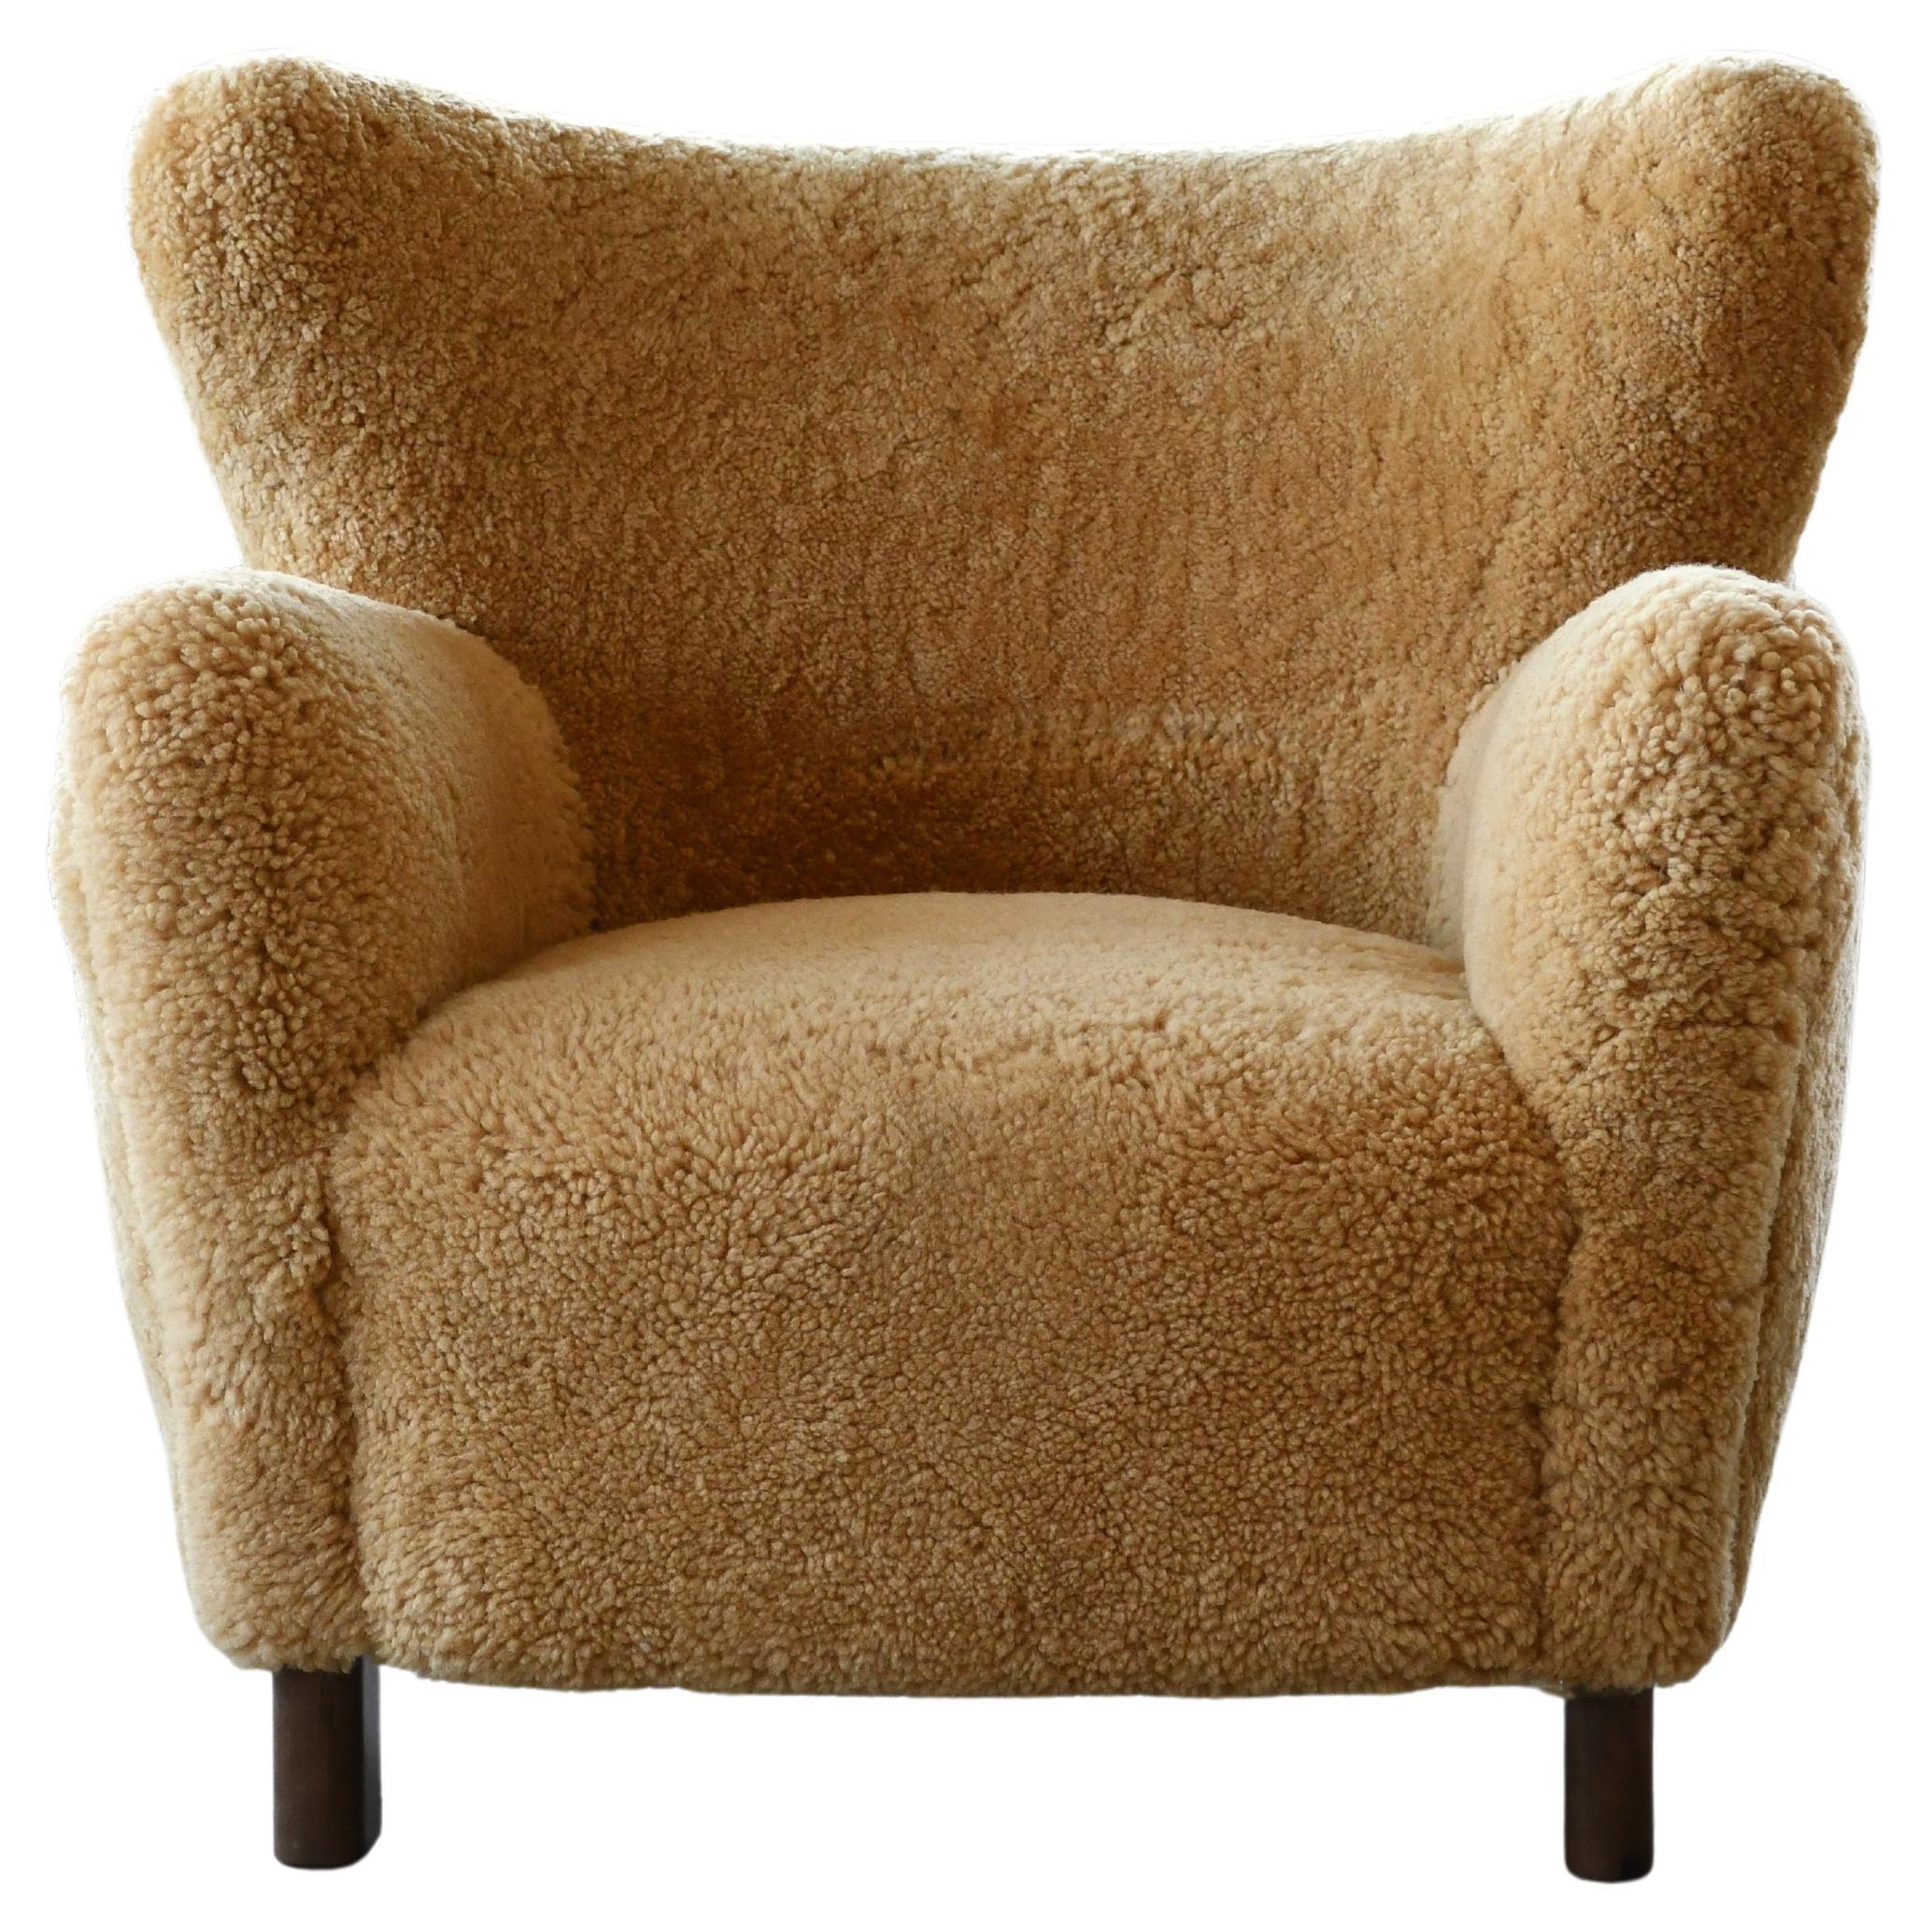 Custom Made 1940's Style Lounge Chair Upholstered in Amber Color Shearling